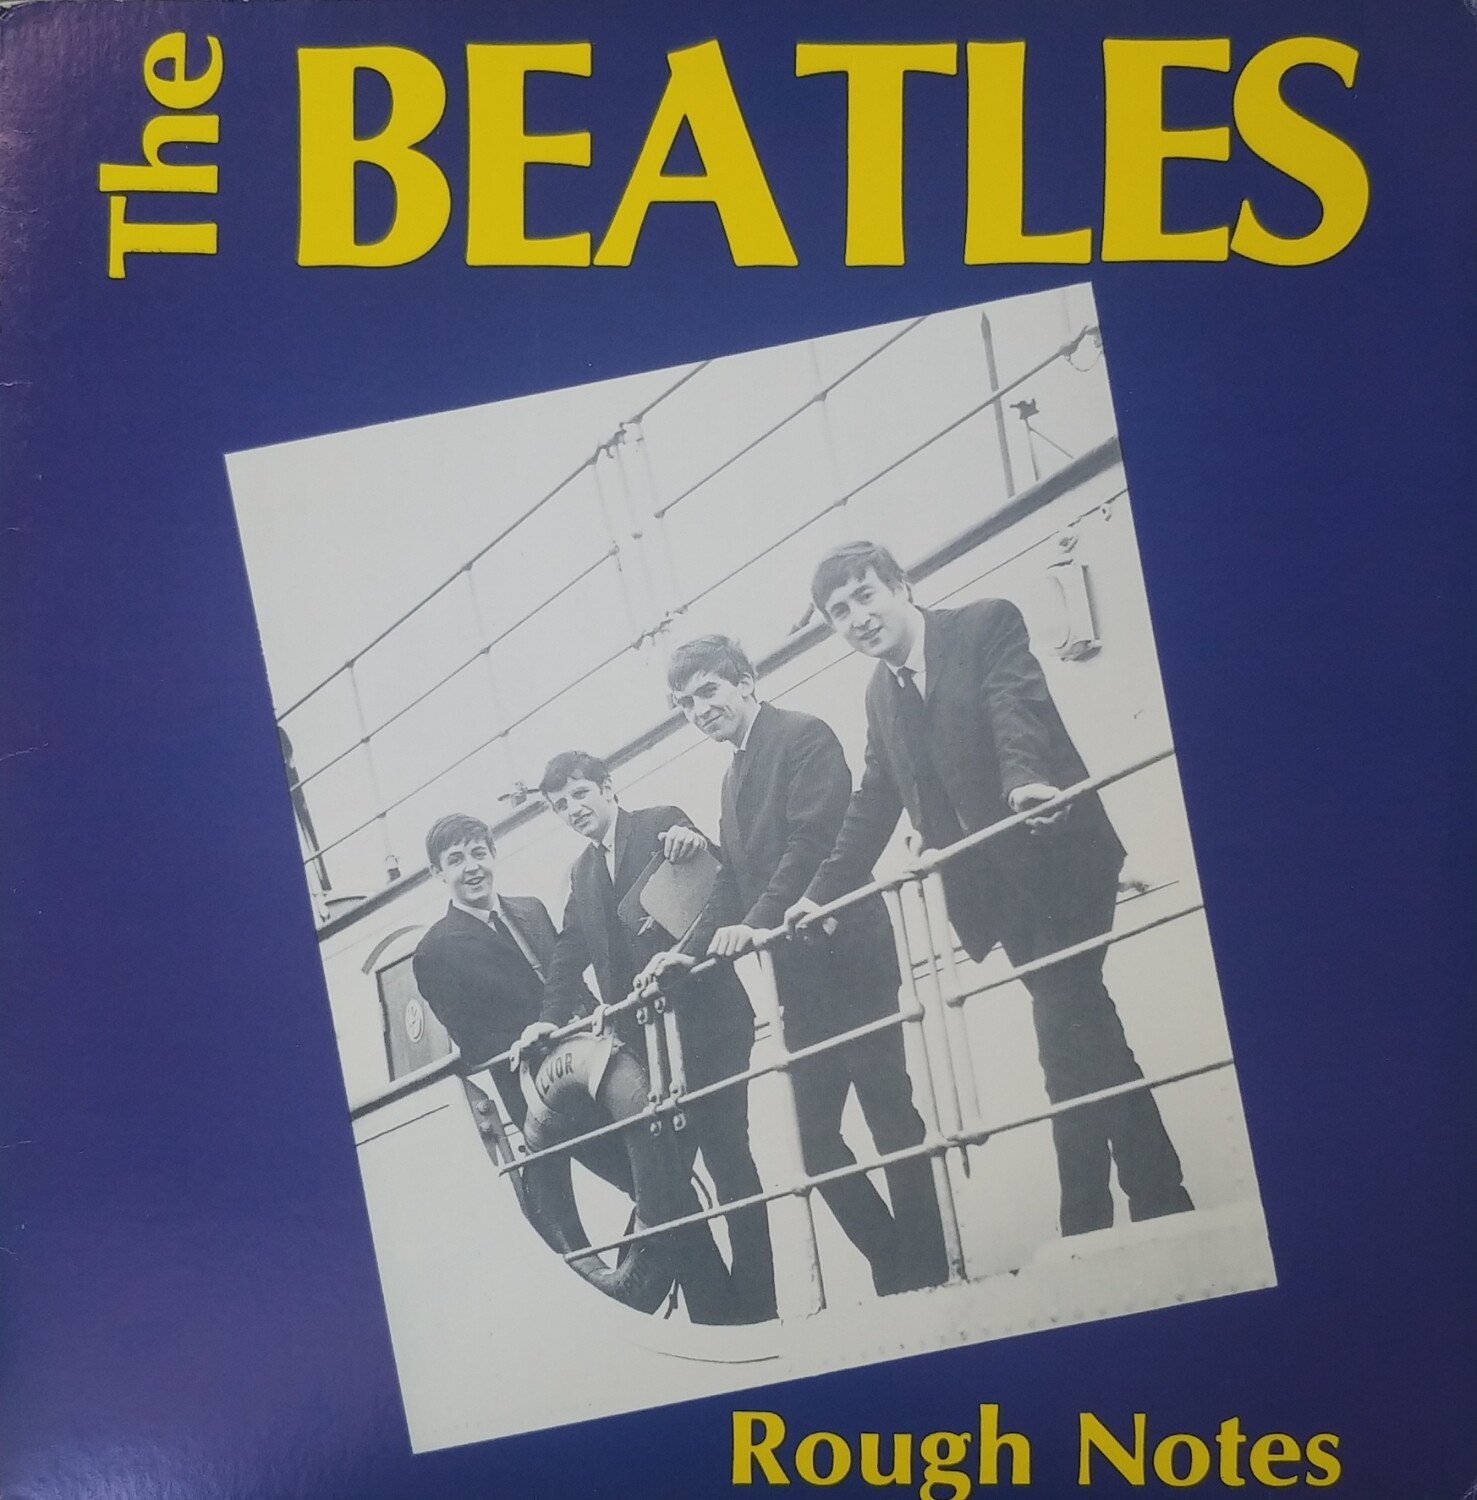 The Beatles - Rough Notes